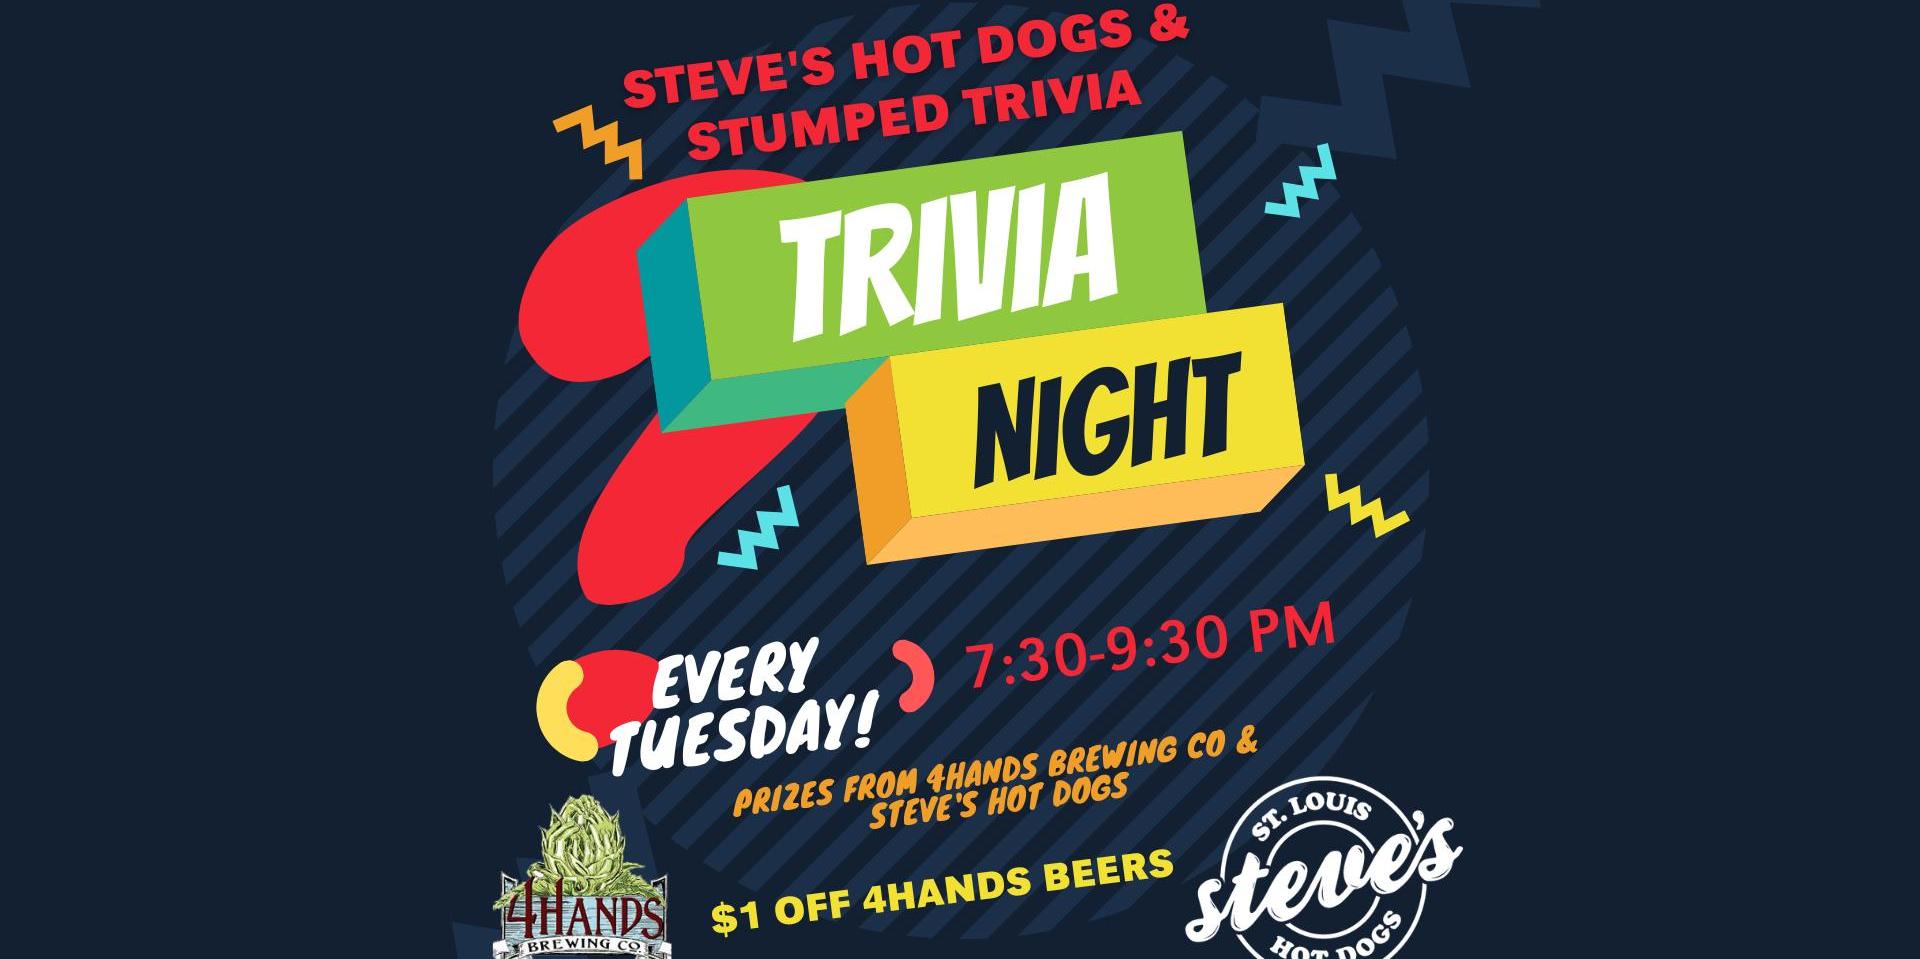 Trivia Night Every Tuesday at Steve's Hot Dogs promotional image